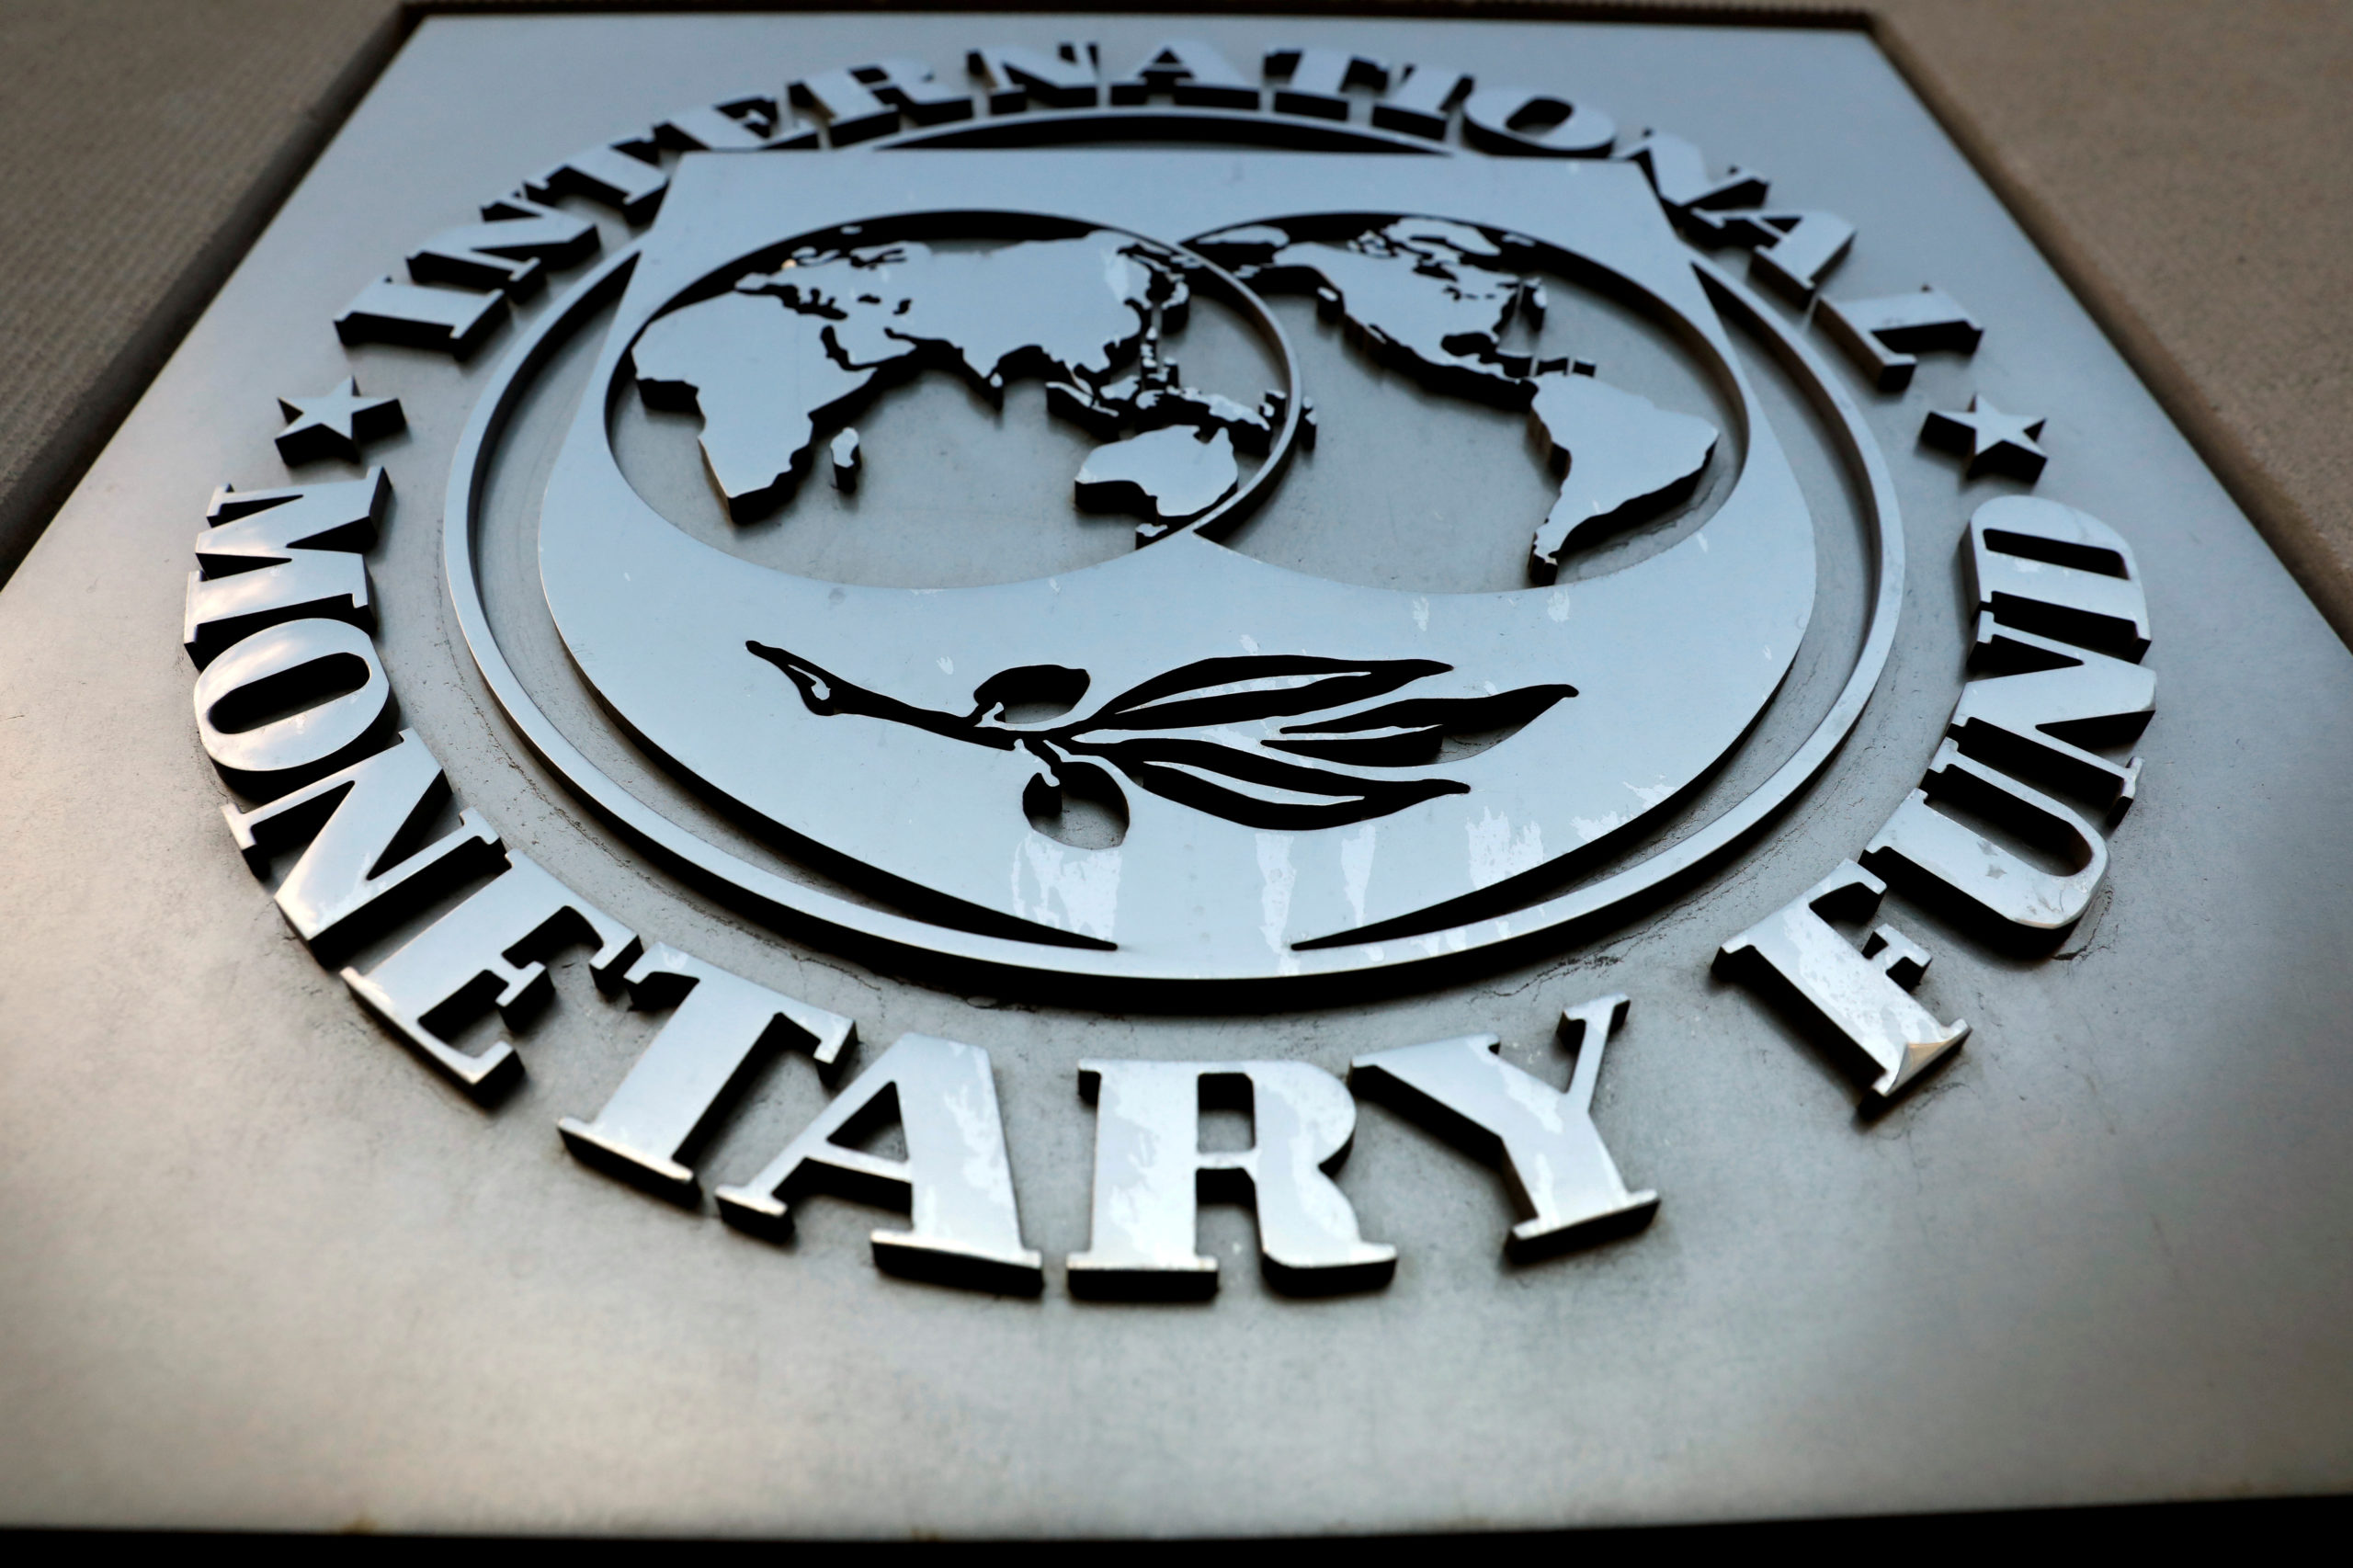 IMF lifts 2023 growth forecast on China reopening, strength in US, Europe